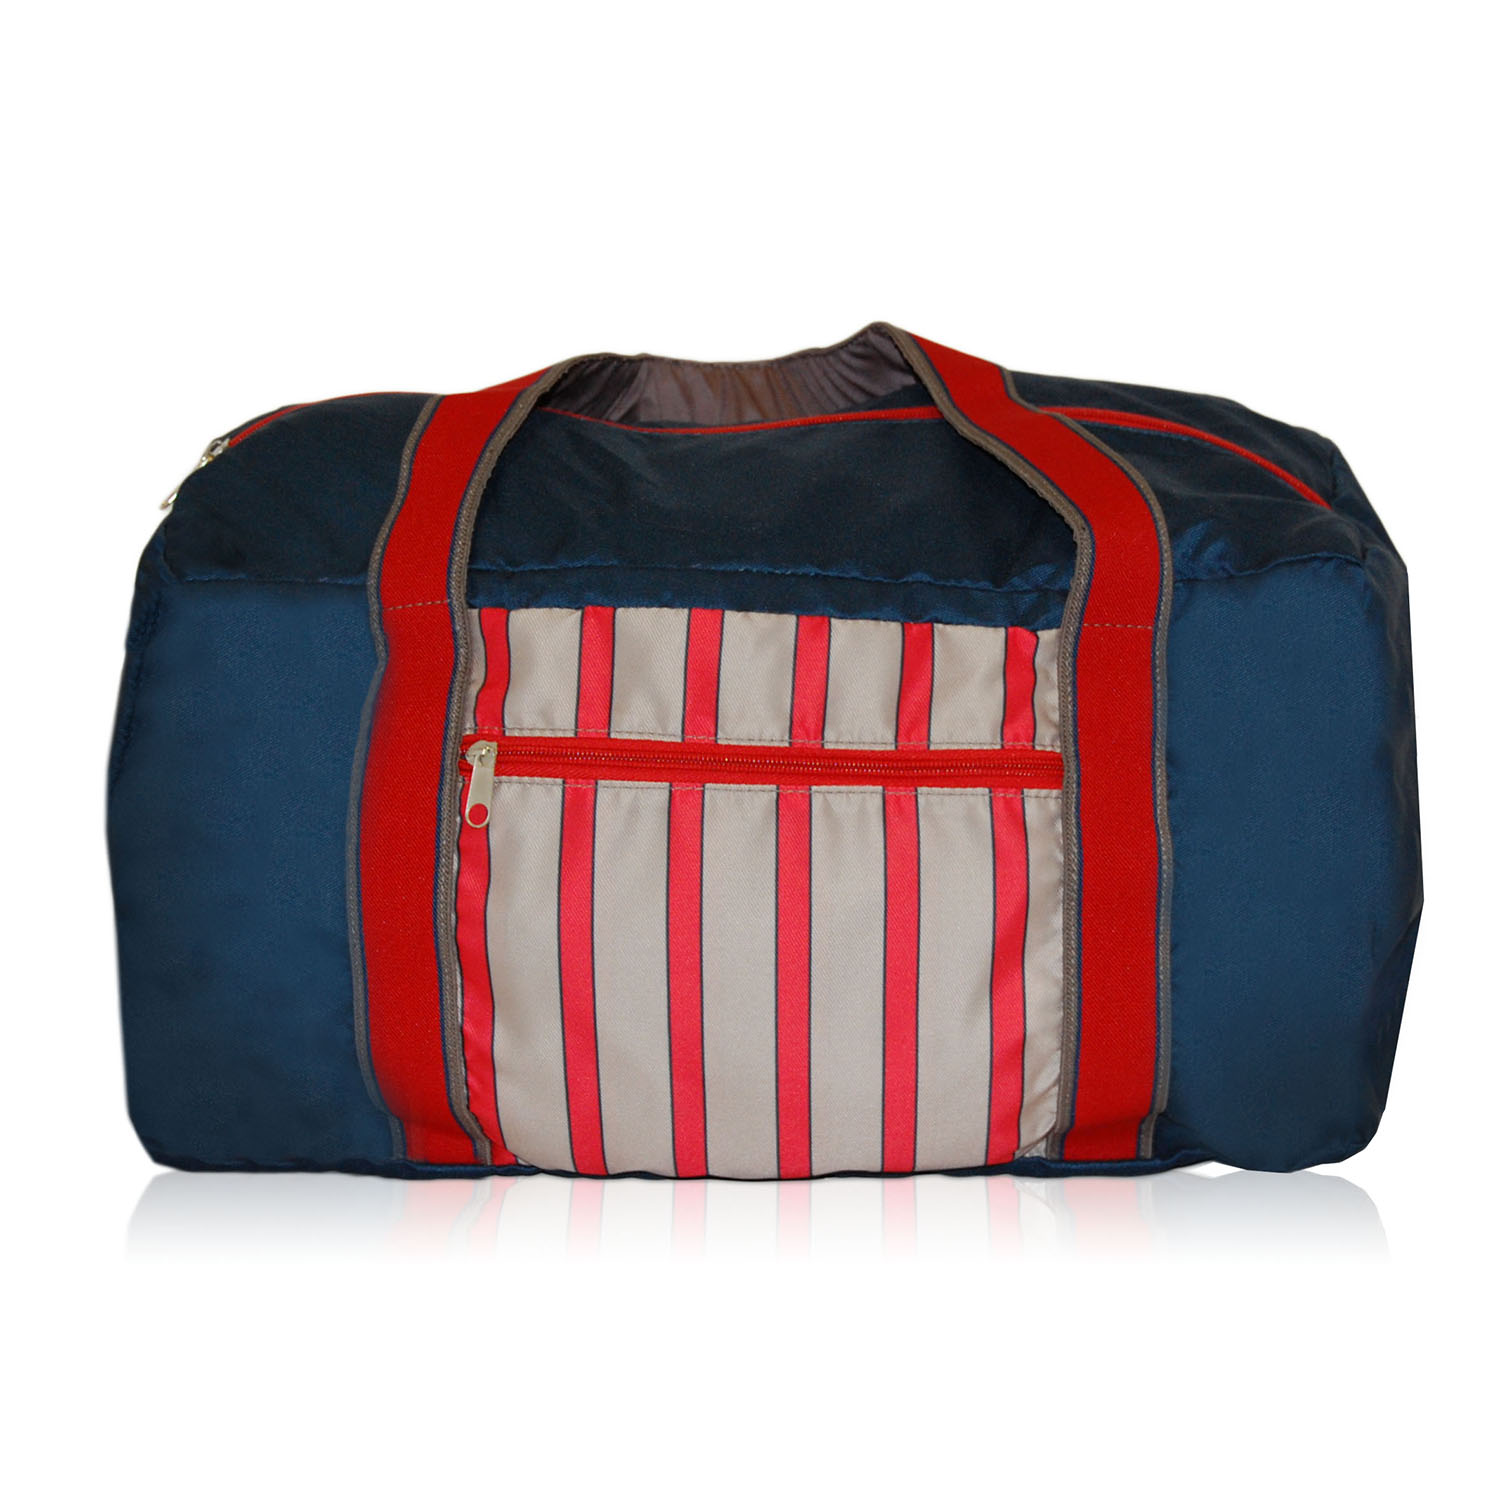 Ross Bennett Travel Duffle Navy - Home - Luggage & Travel Gear - Carry-on & Checked Luggage